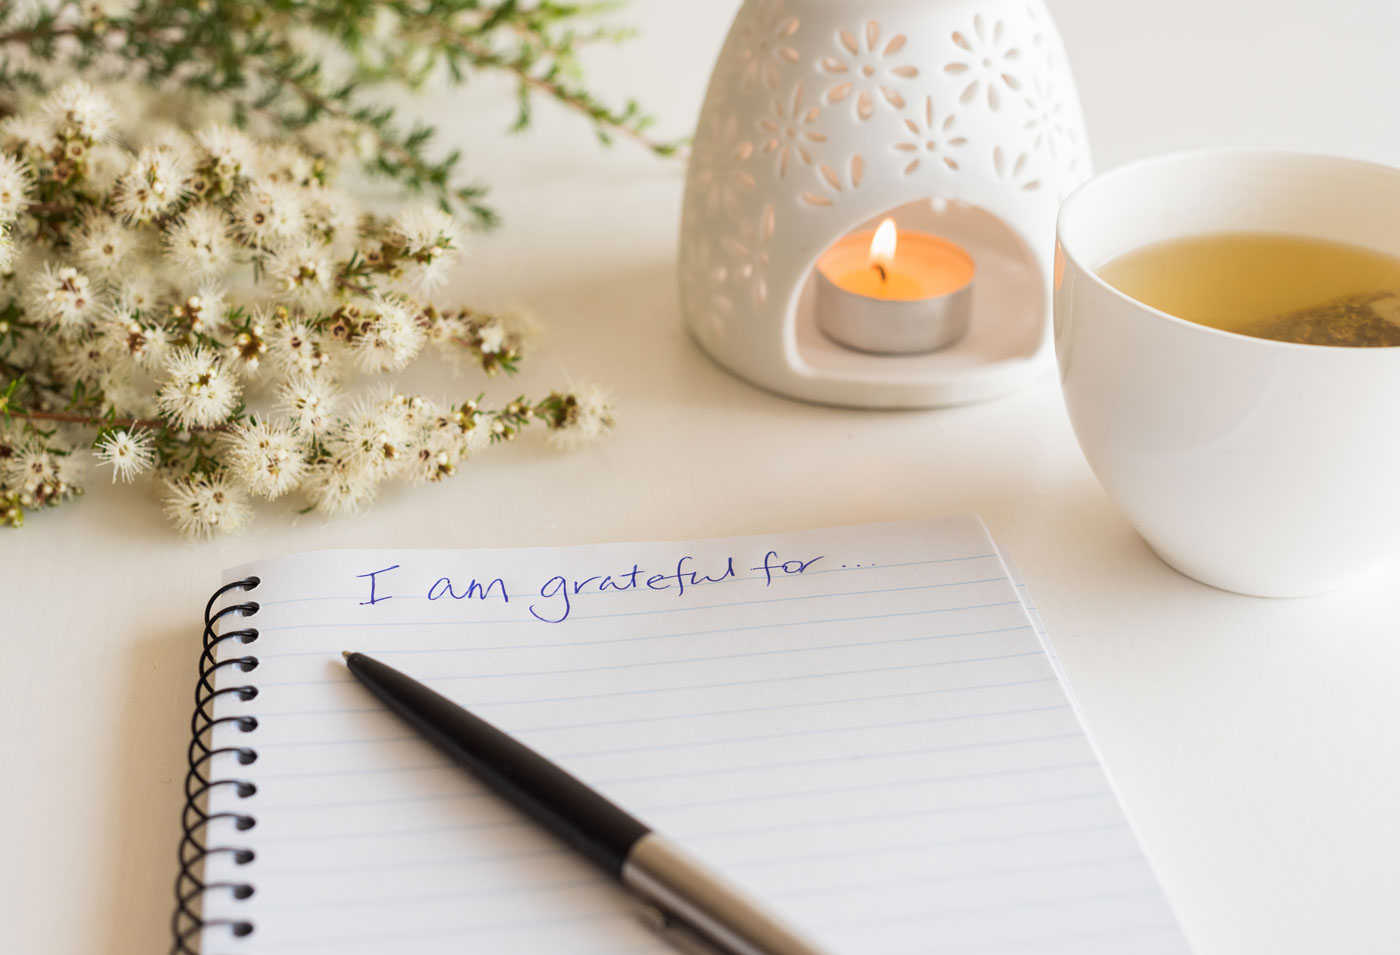 Gratitude: A Powerful Practice for Relieving Stress and Anxiety